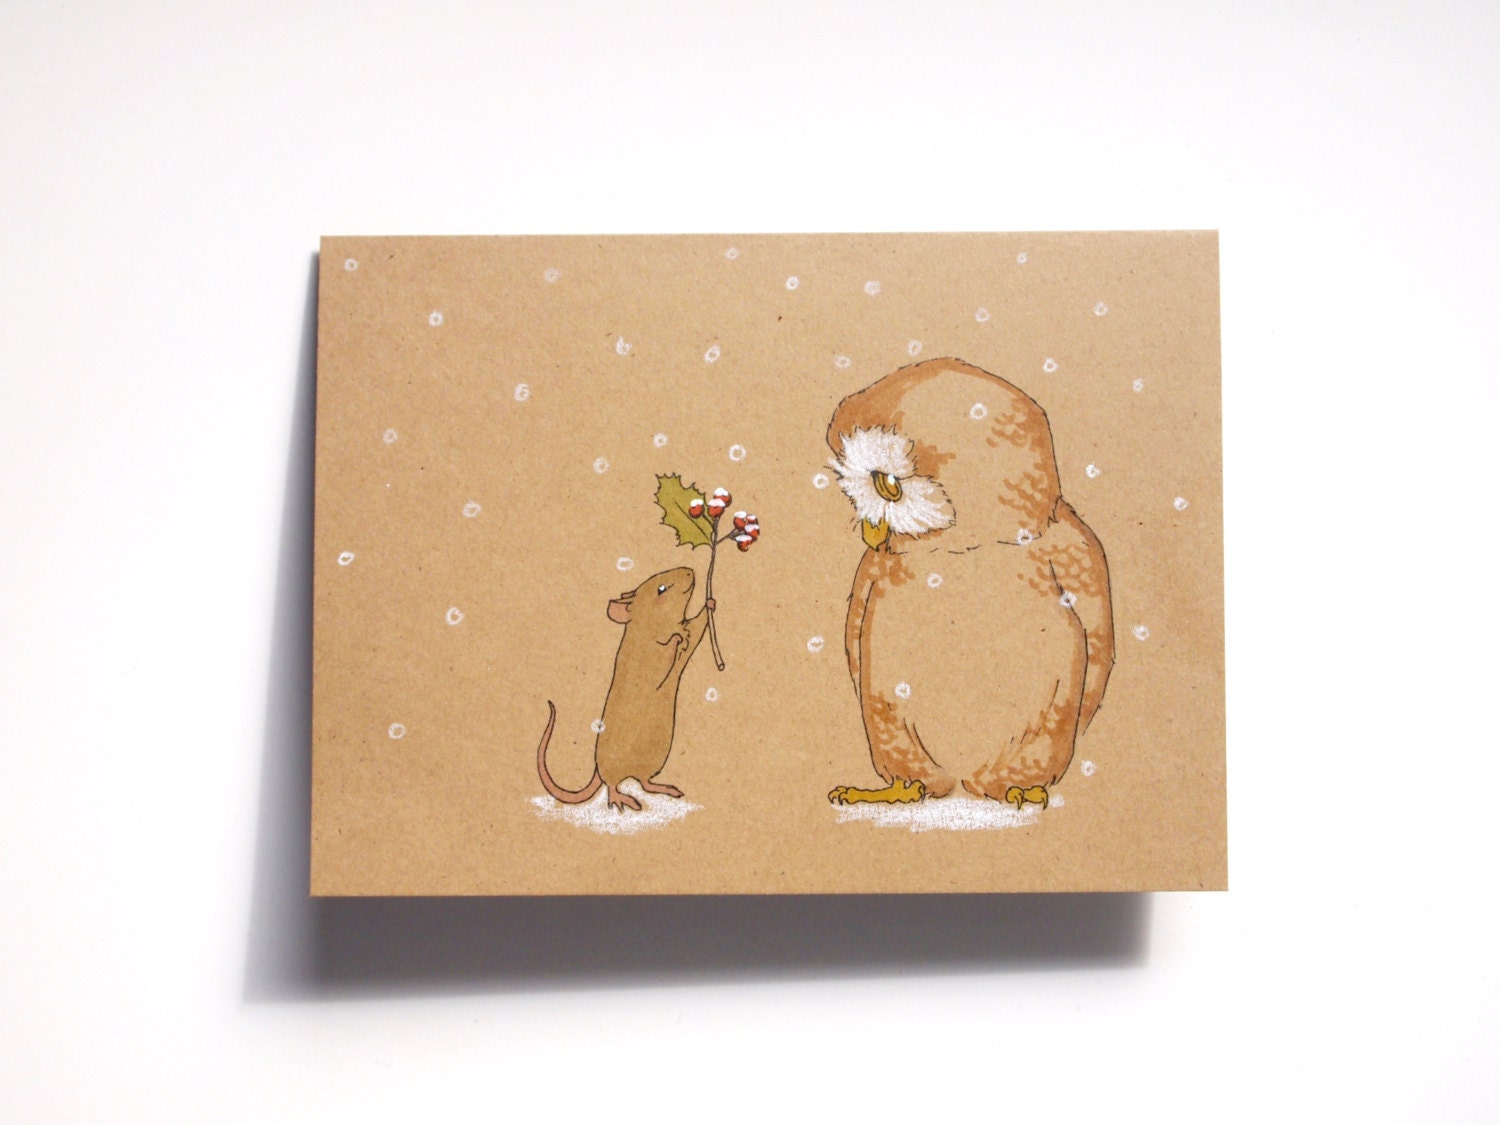 Hand Painted Rustic Christmas Card Set on Recycled Paper - ABunnyandBear